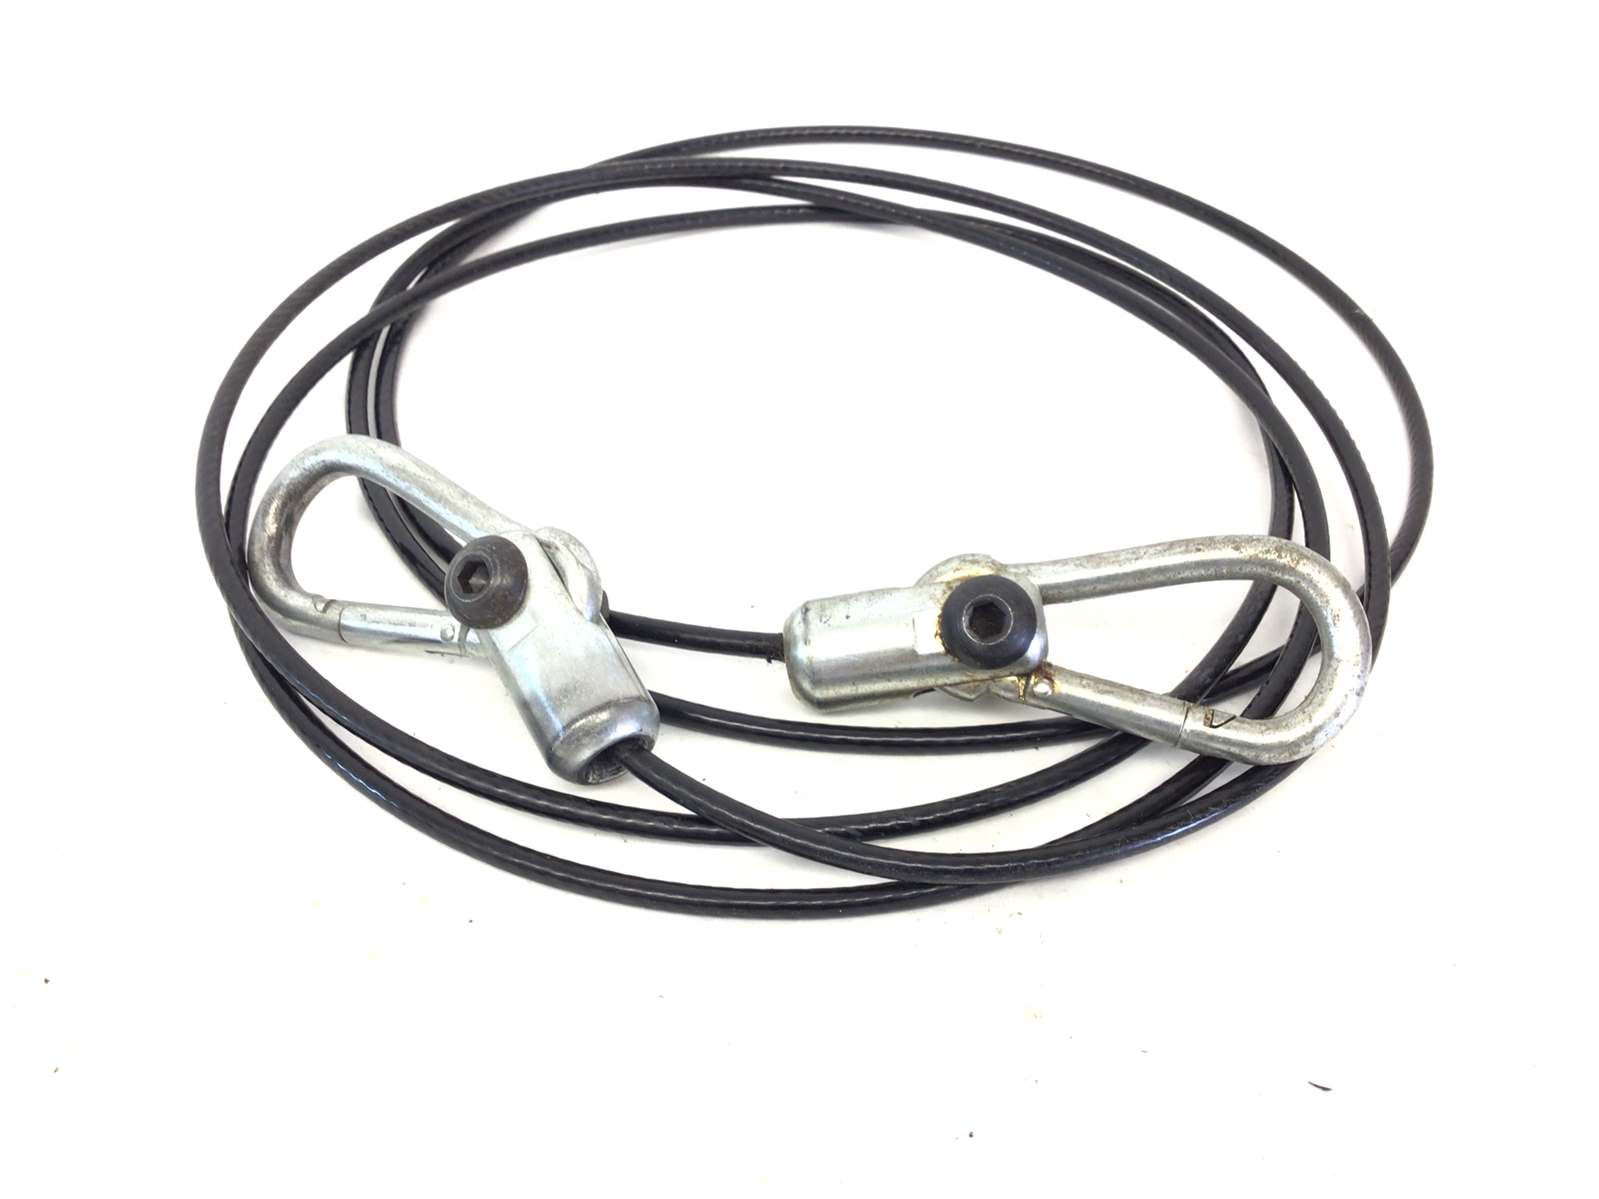 Cable Assembly (Used)